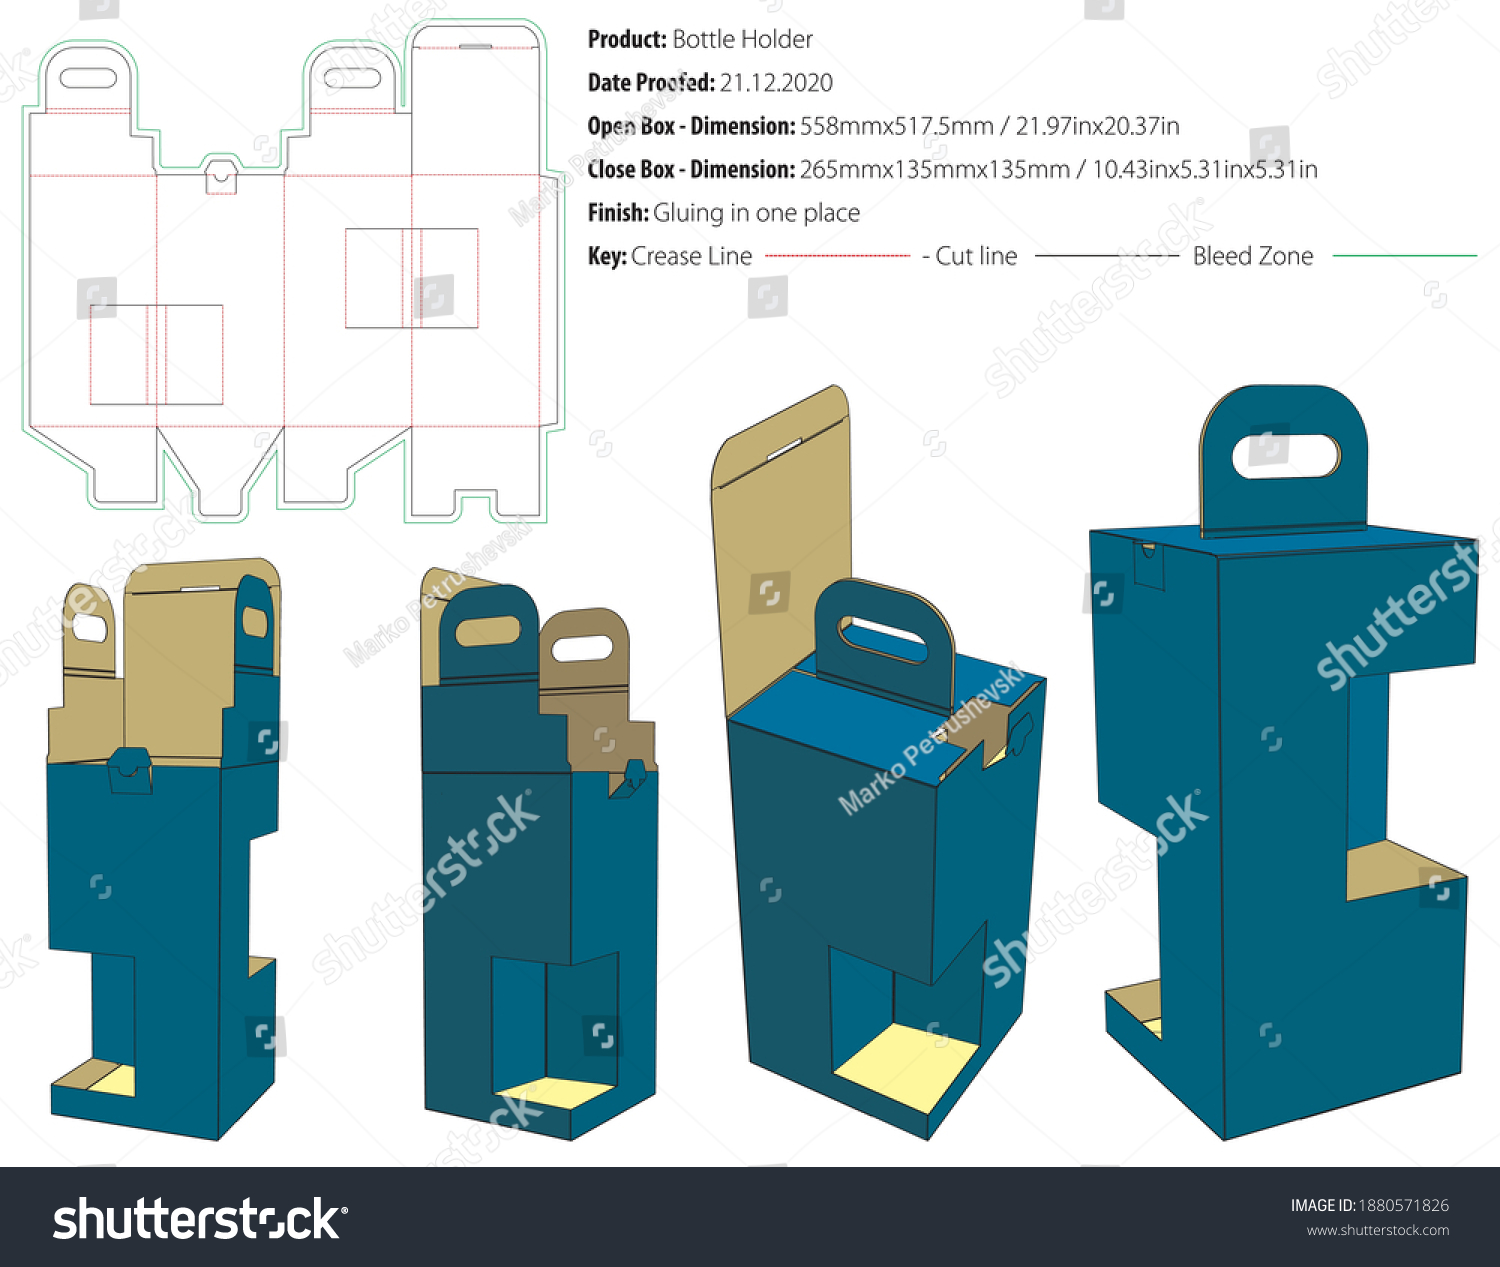 SVG of Two bottle holder with two windows tuck tongue lock and top handles packaging design template gluing die cut - vector svg